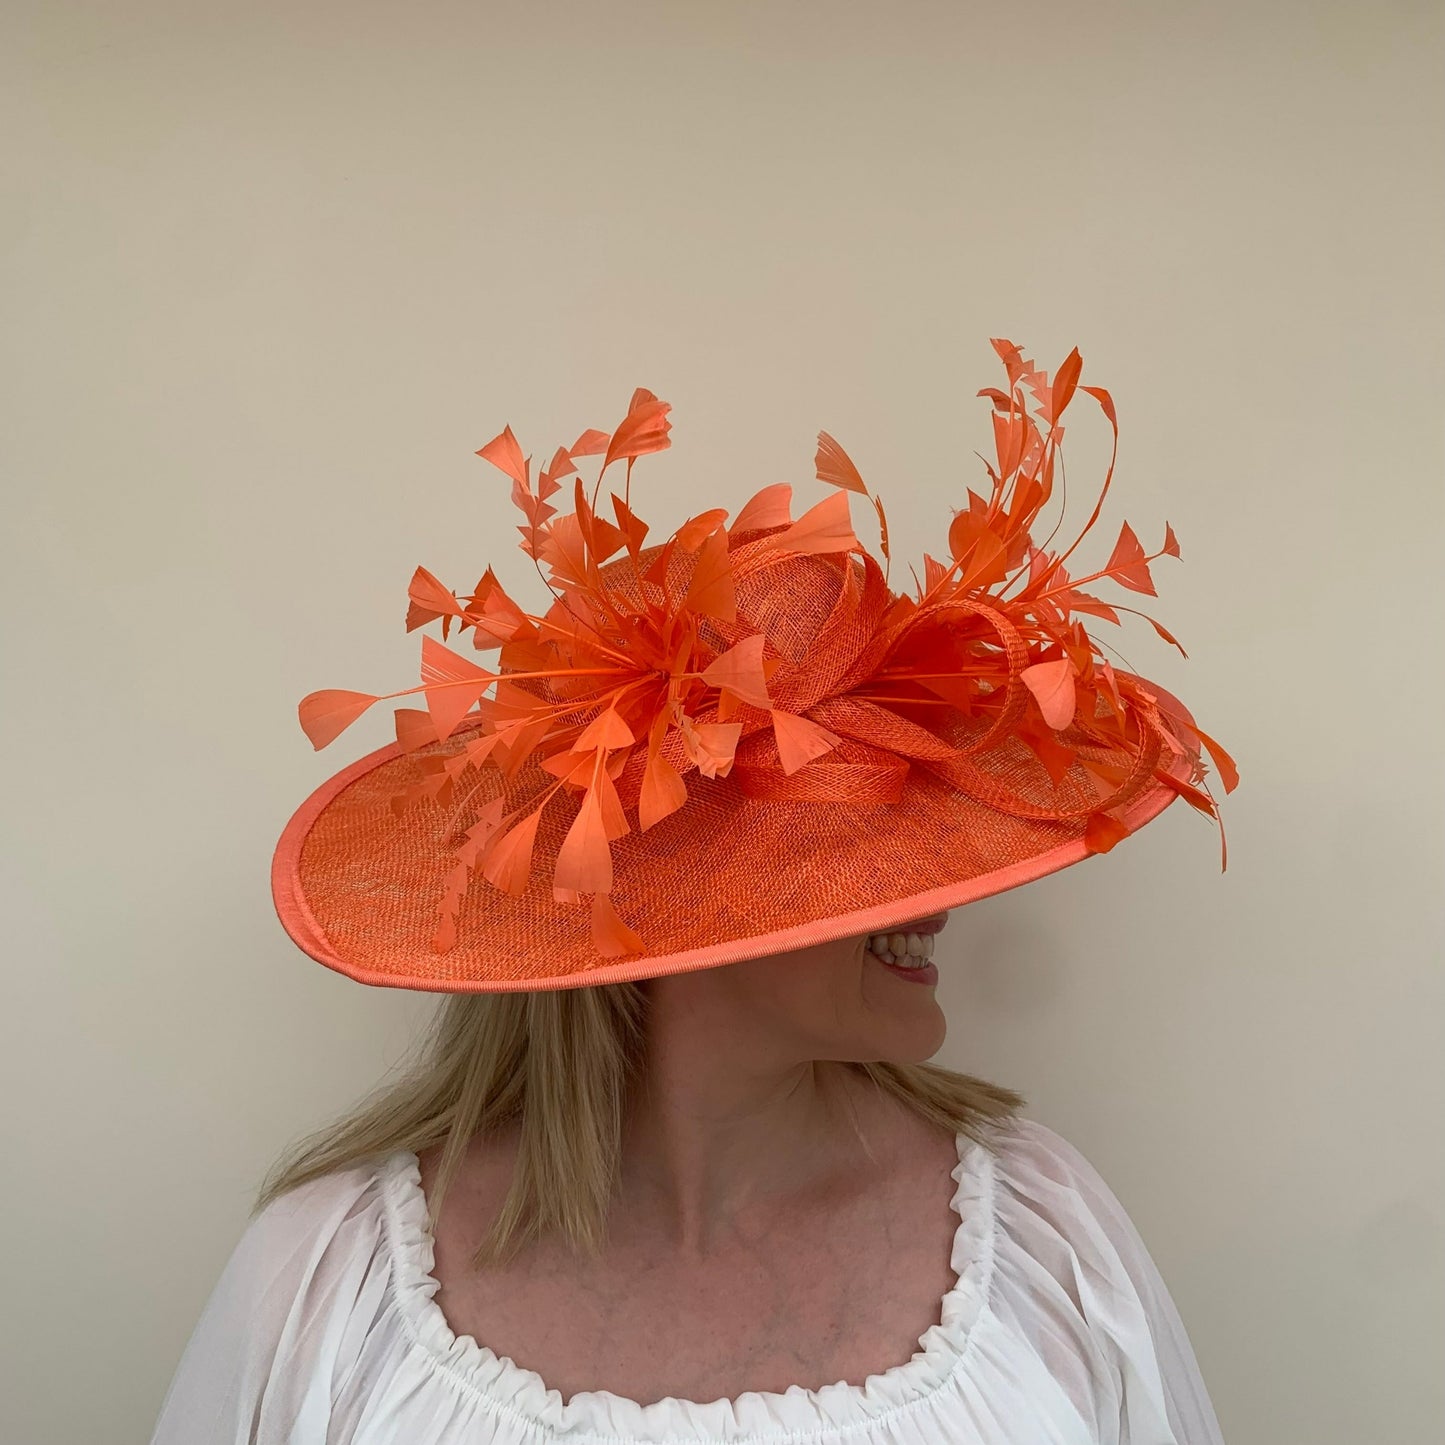 J Bees JB23/284 Large Hatinator with Feathers in Red & Orange